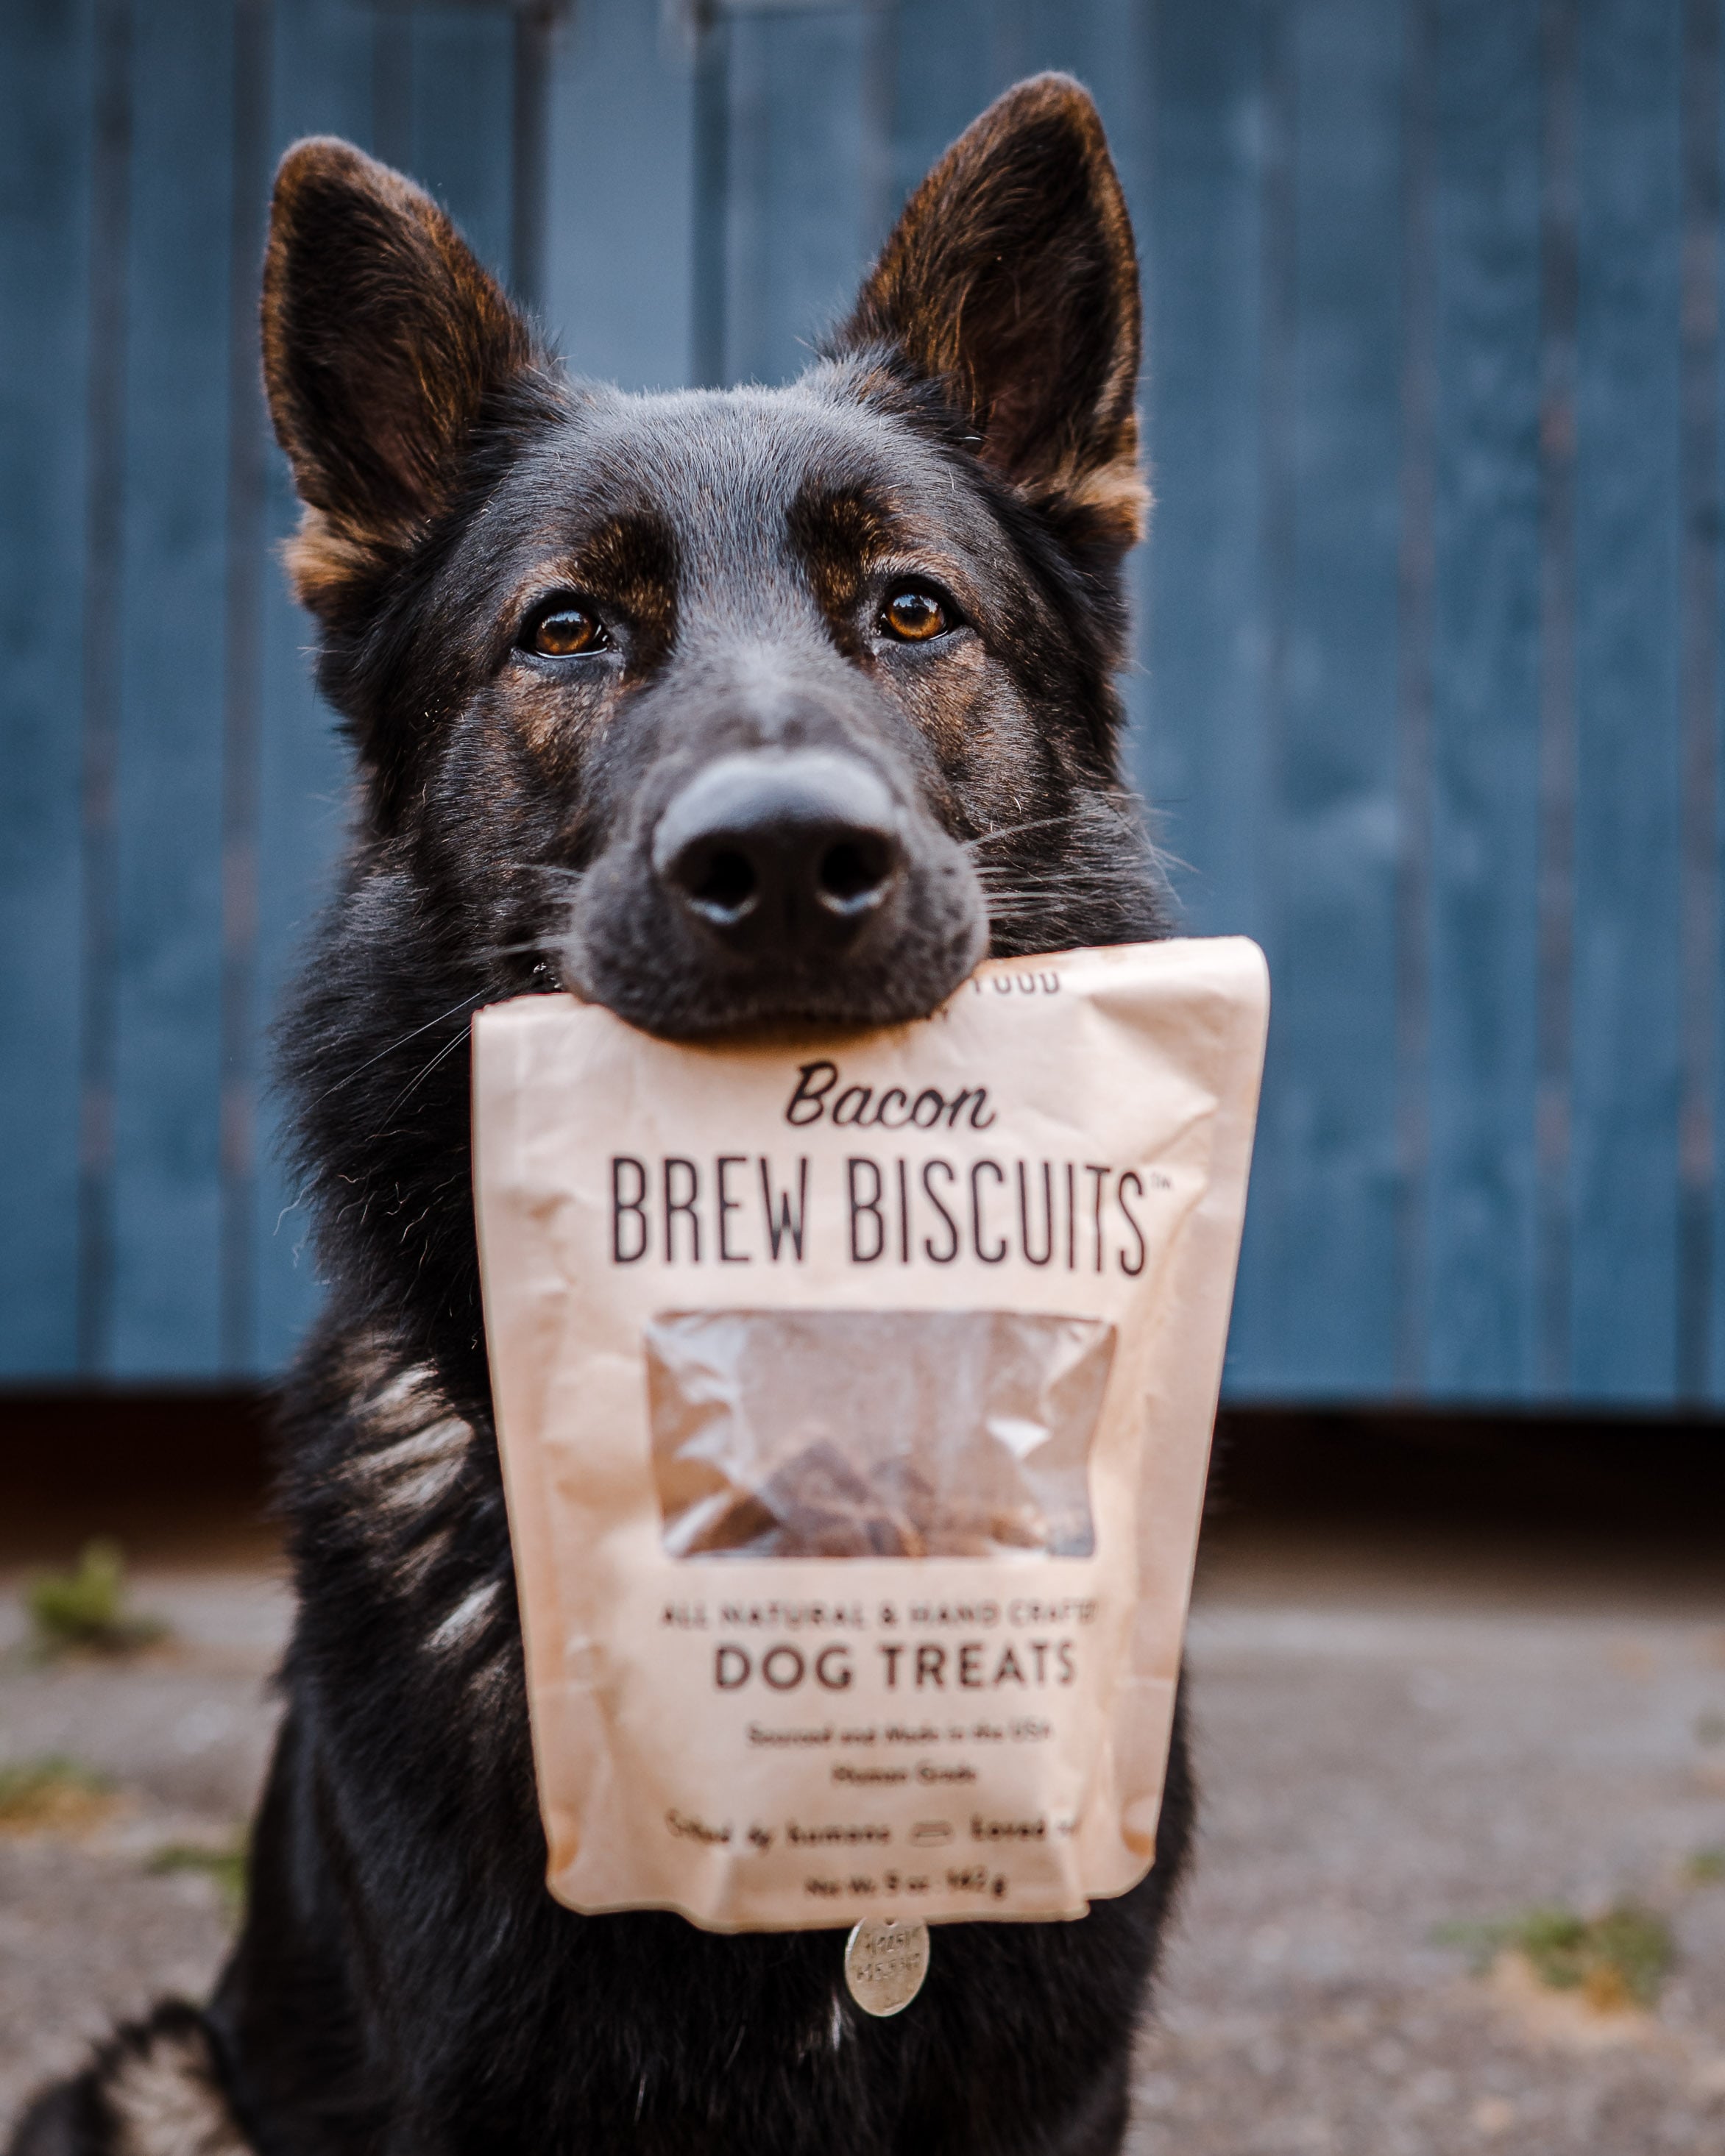 A dog holding up Portland Pet Food's limited ingredient Brew Biscuits.